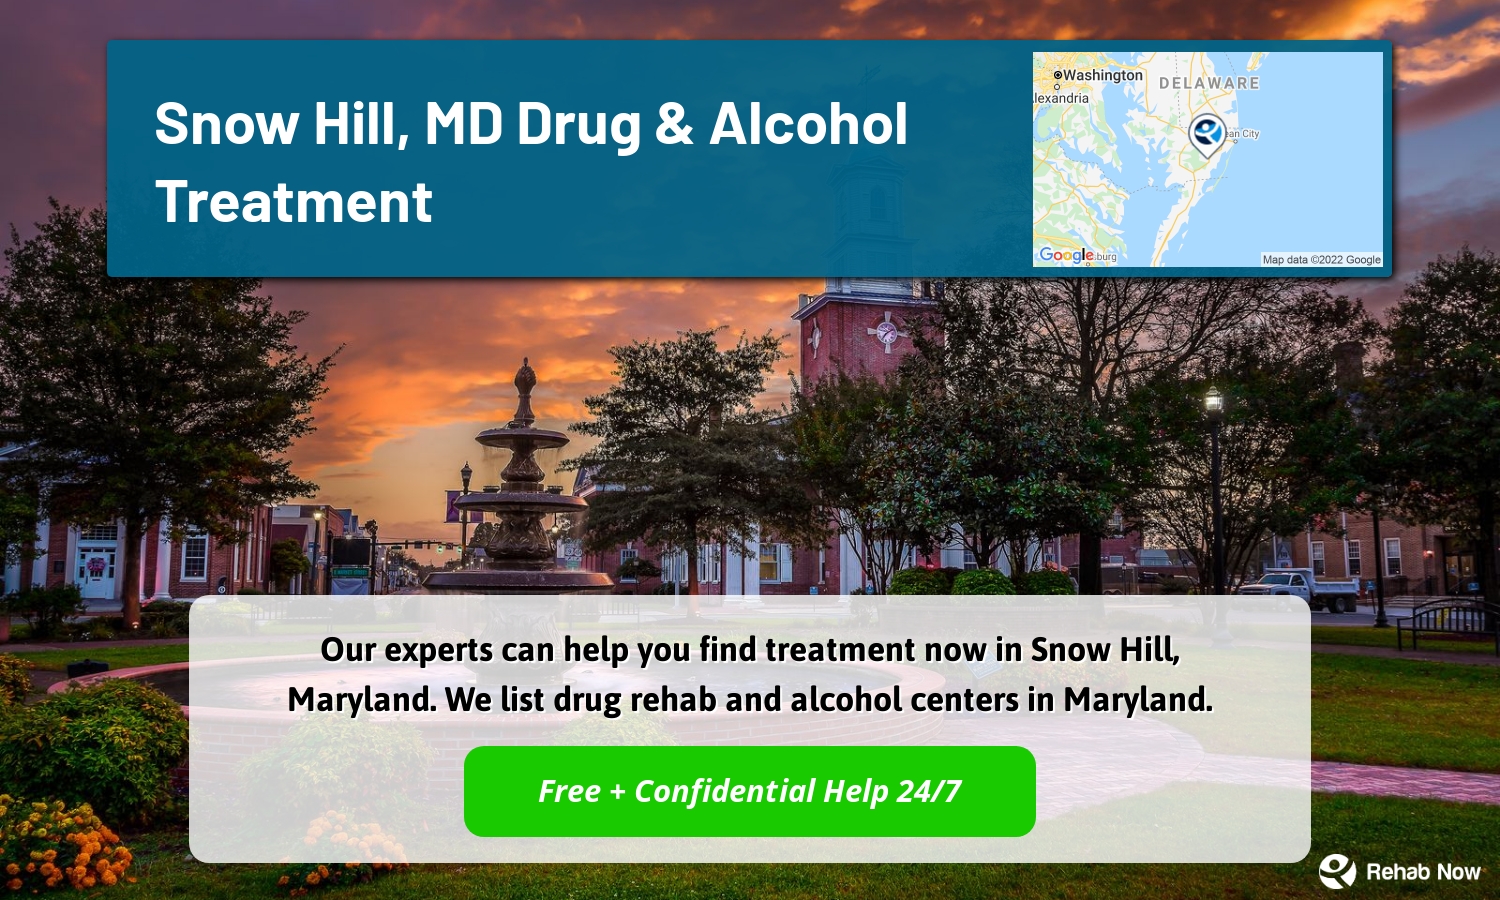 Our experts can help you find treatment now in Snow Hill, Maryland. We list drug rehab and alcohol centers in Maryland.